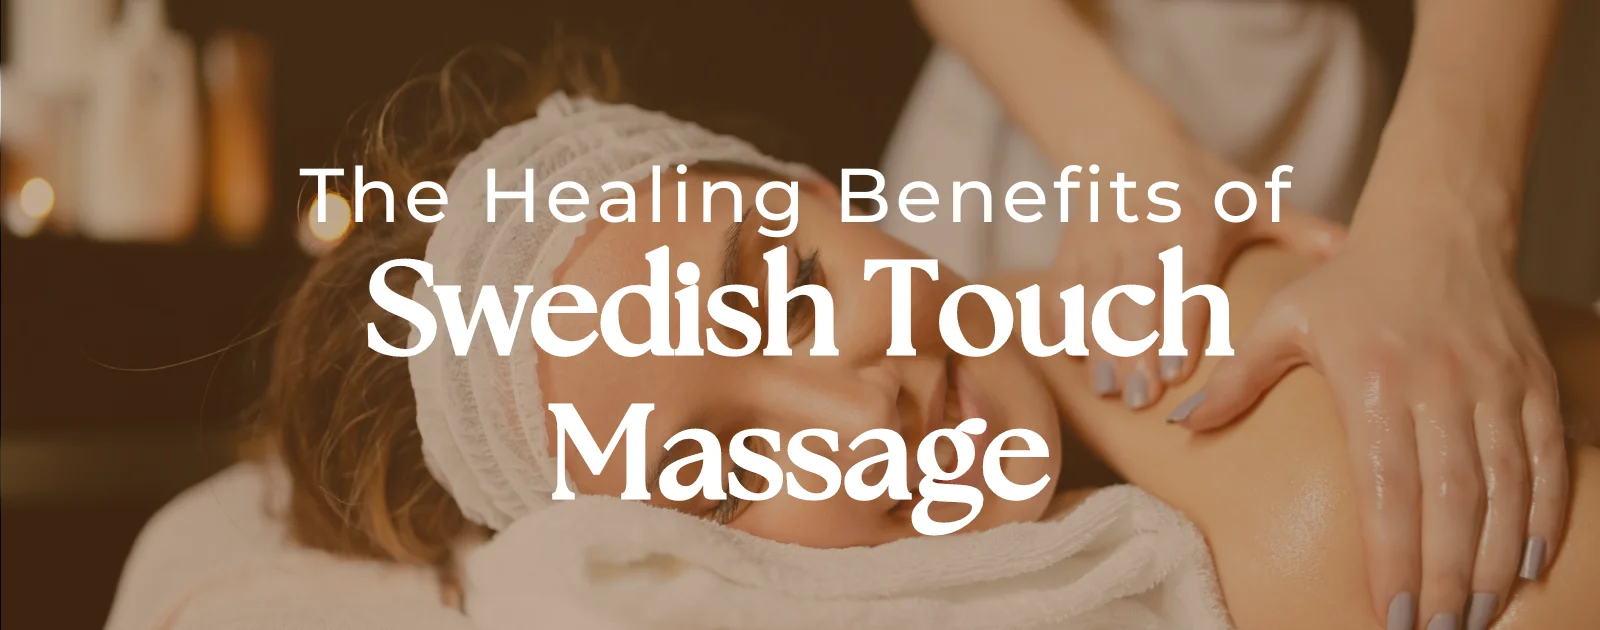 The Healing Benefits of Swedish Touch Massage A Comprehensive Guide